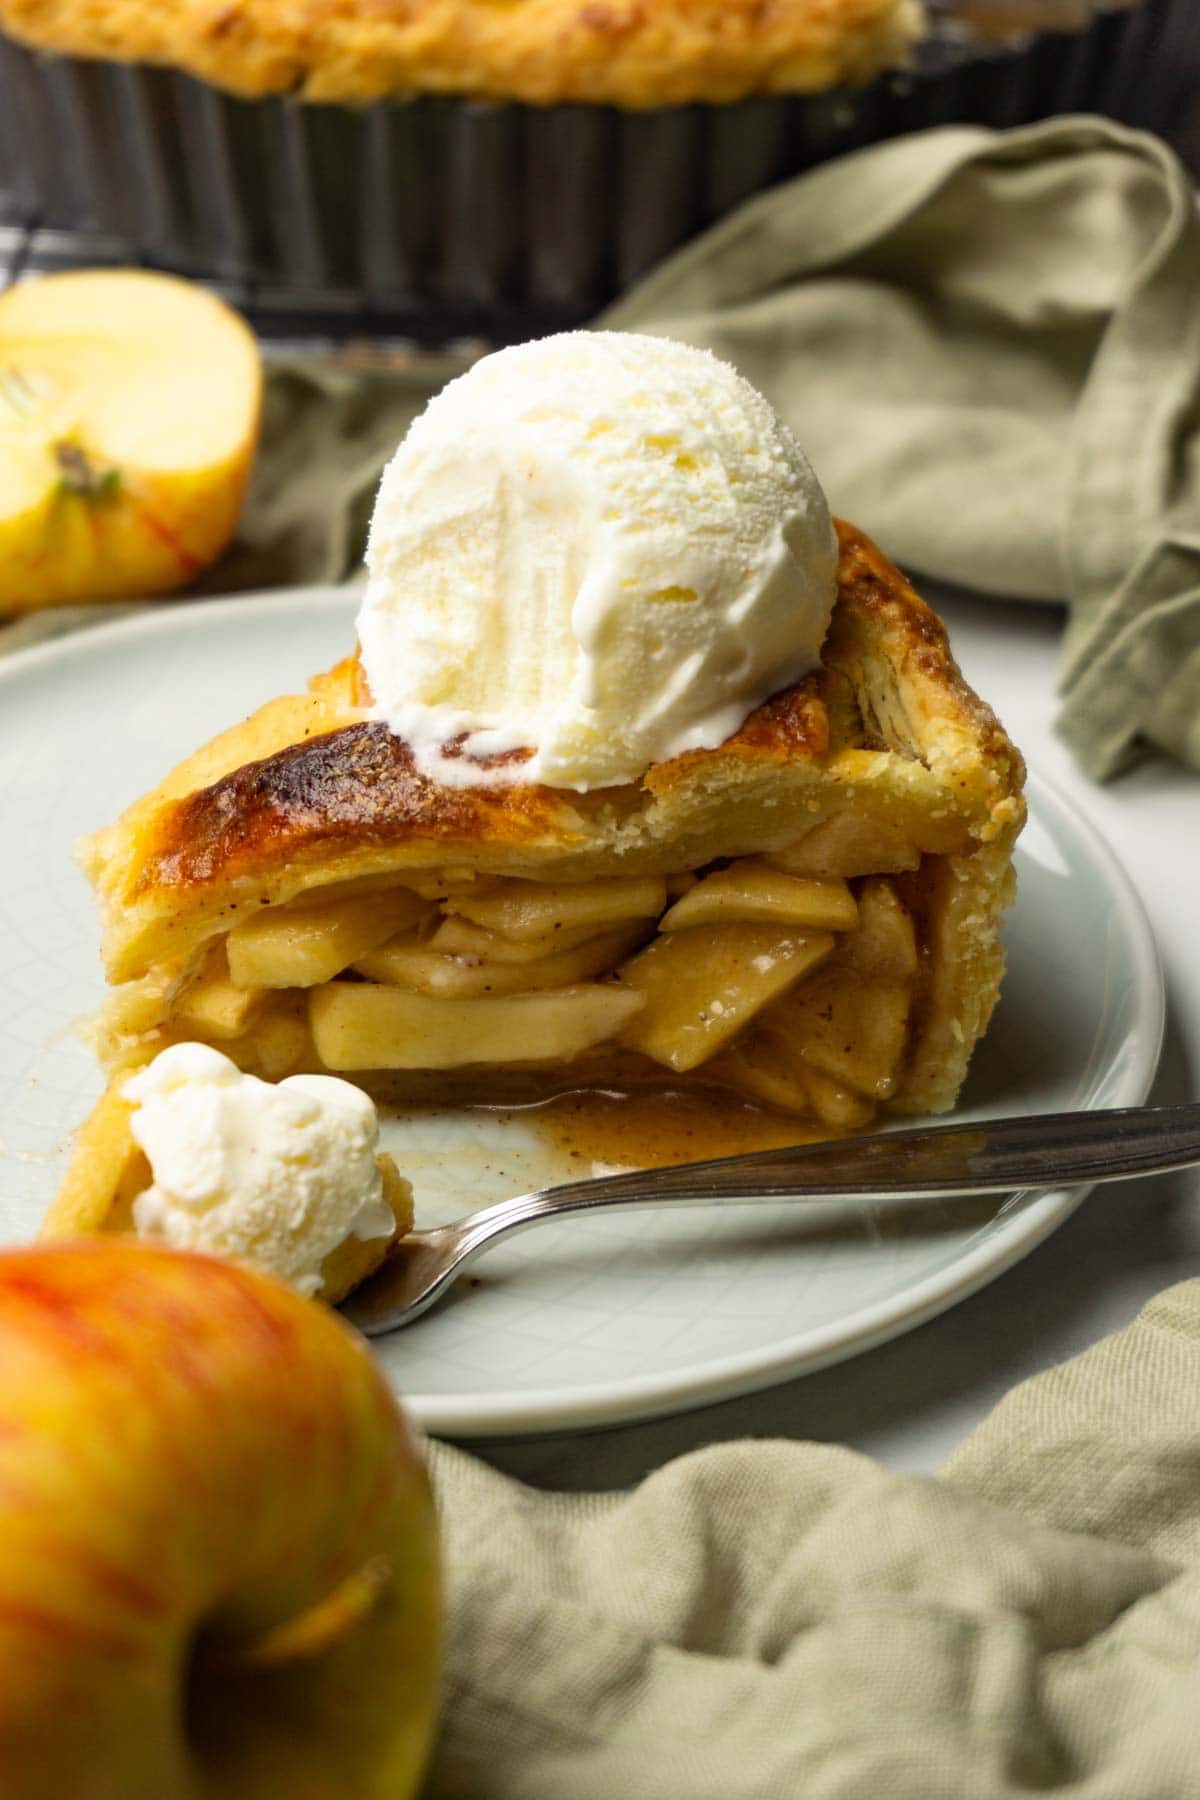 A piece of apple pie with a scoop of vanilla ice cream on top served on a small round plate, one bite taken from it, fresh apples are lying around.